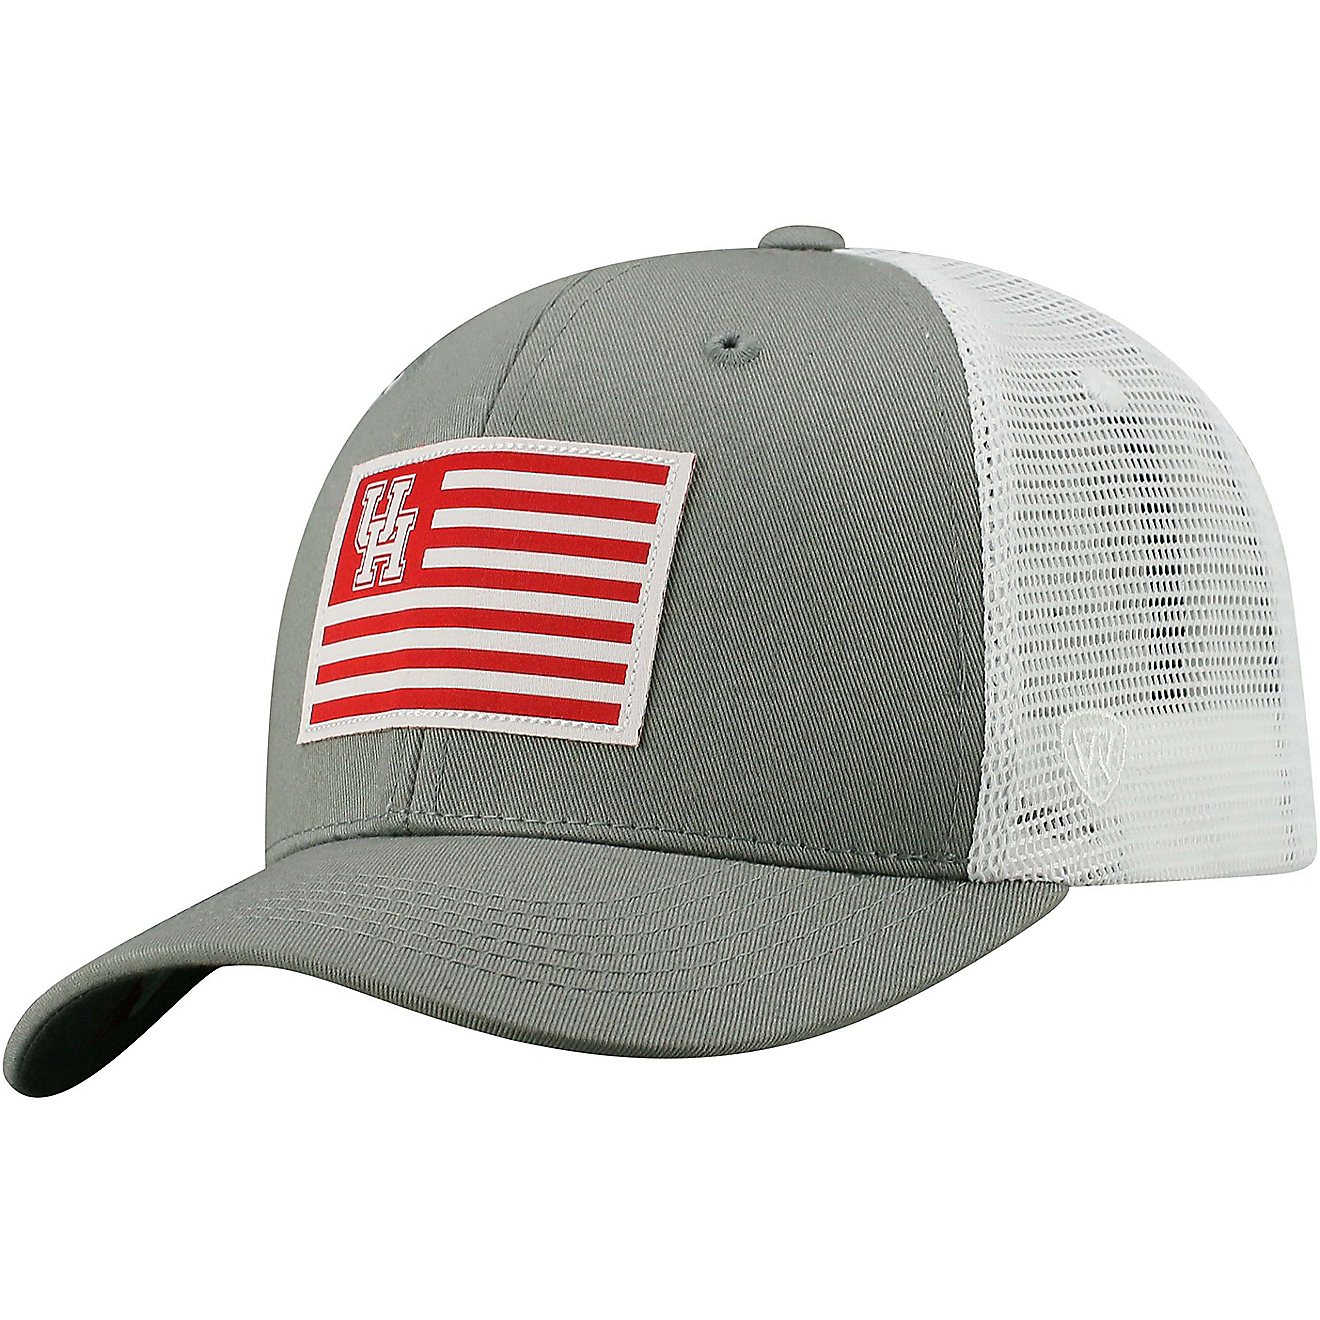 Top of the World Men's University of Houston Brave Snapback Cap                                                                  - view number 2